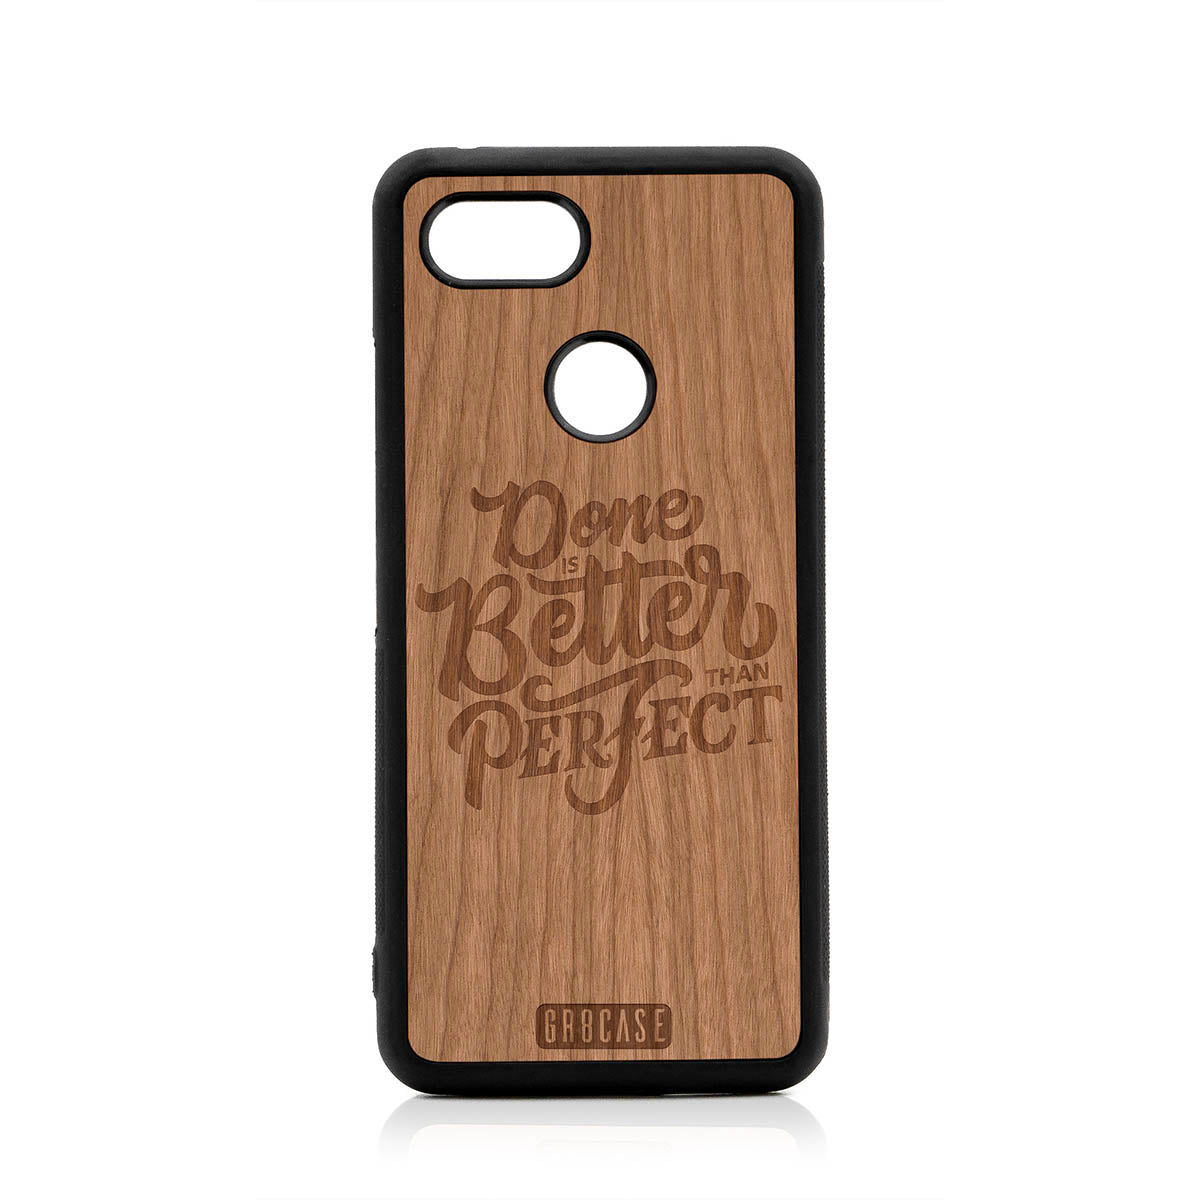 Done Is Better Than Perfect Design Wood Case For Google Pixel 3 by GR8CASE